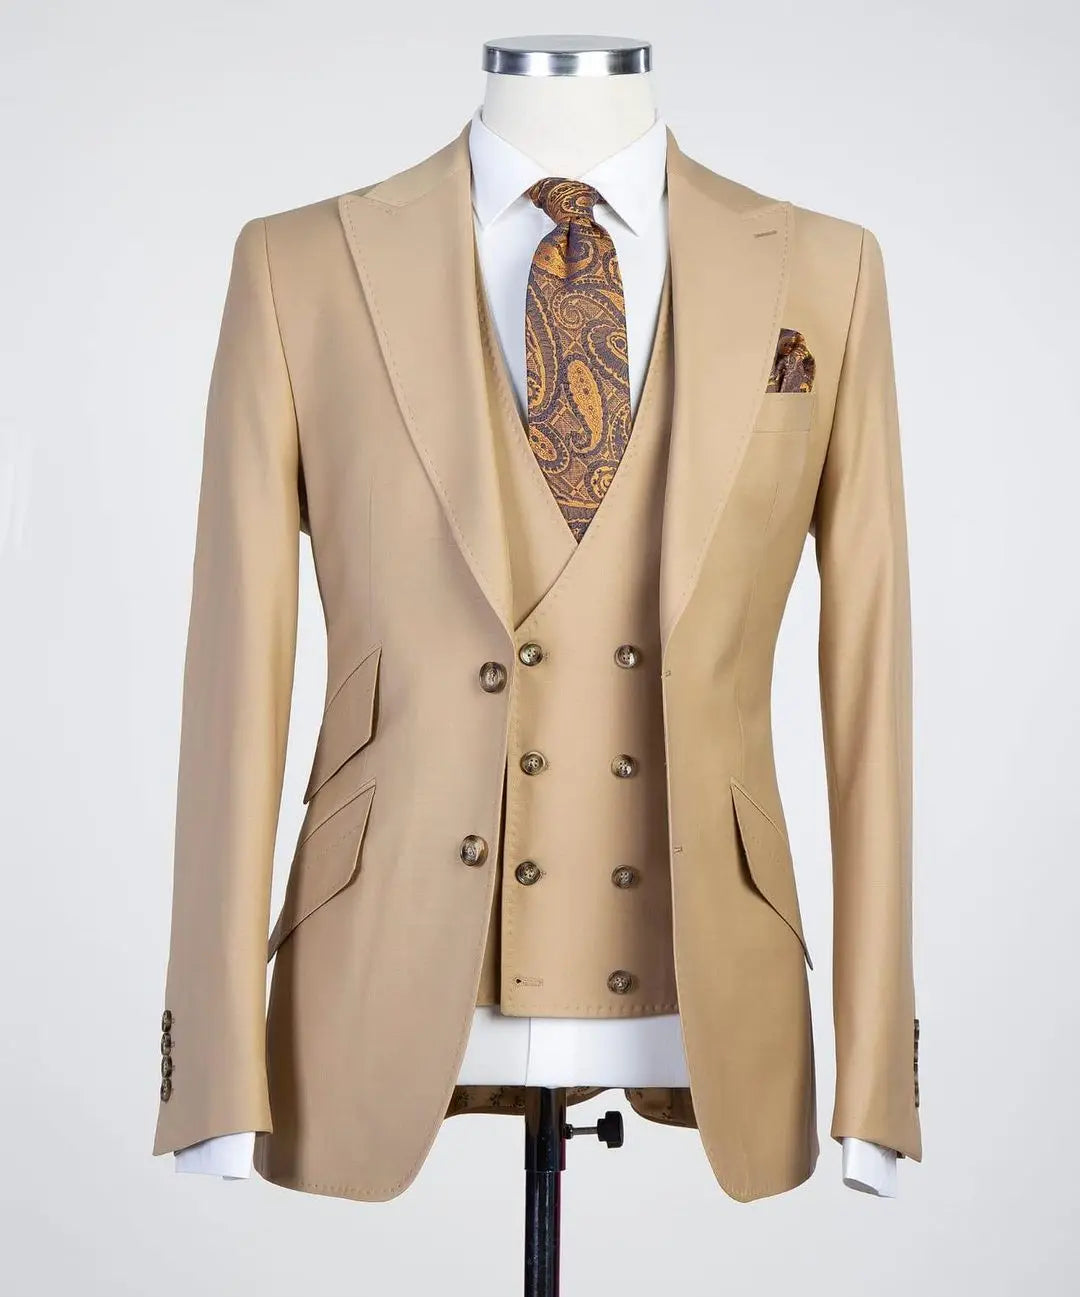 Men's Beige Three Piece Suit Double Breasted Vest Paisley Tie and Pocket Square